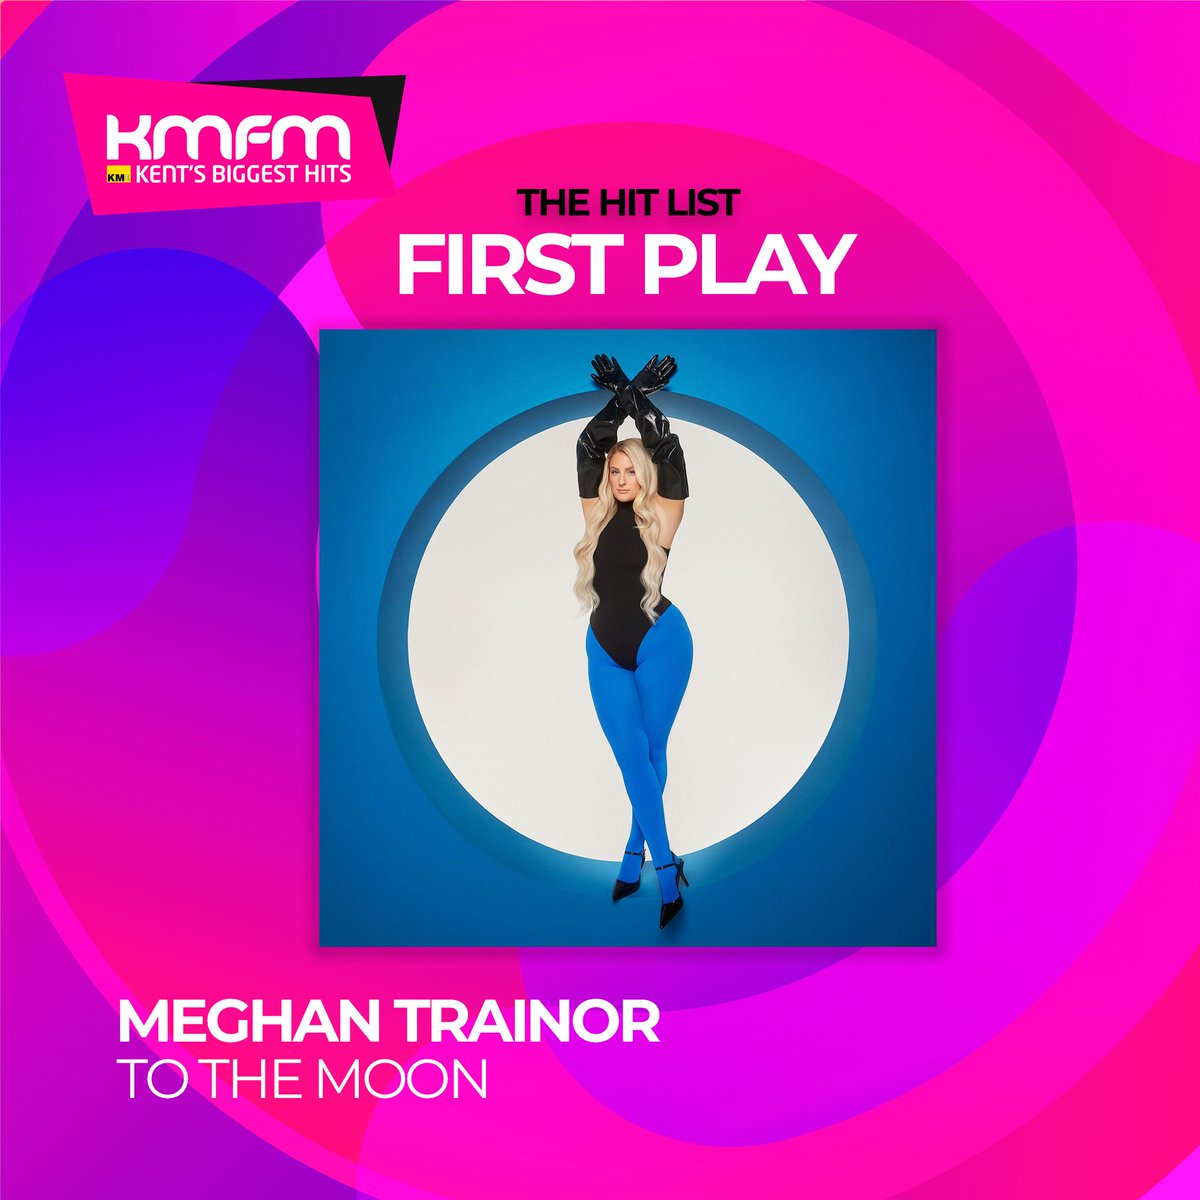 🔊 NEW MUSIC MON-YAY 🔊

🔥 NEW #RecordOfTheWeek from @BeckyHill. Hear #RightHere, her latest drum'n'bass anthem after 8pm.

💖 @Meghan_Trainor is back with a HUGE pop hit #ToTheMoon. It's our #FirstPlay at 7:20pm.

⏯️ kmfm.co.uk/player #nowplaying